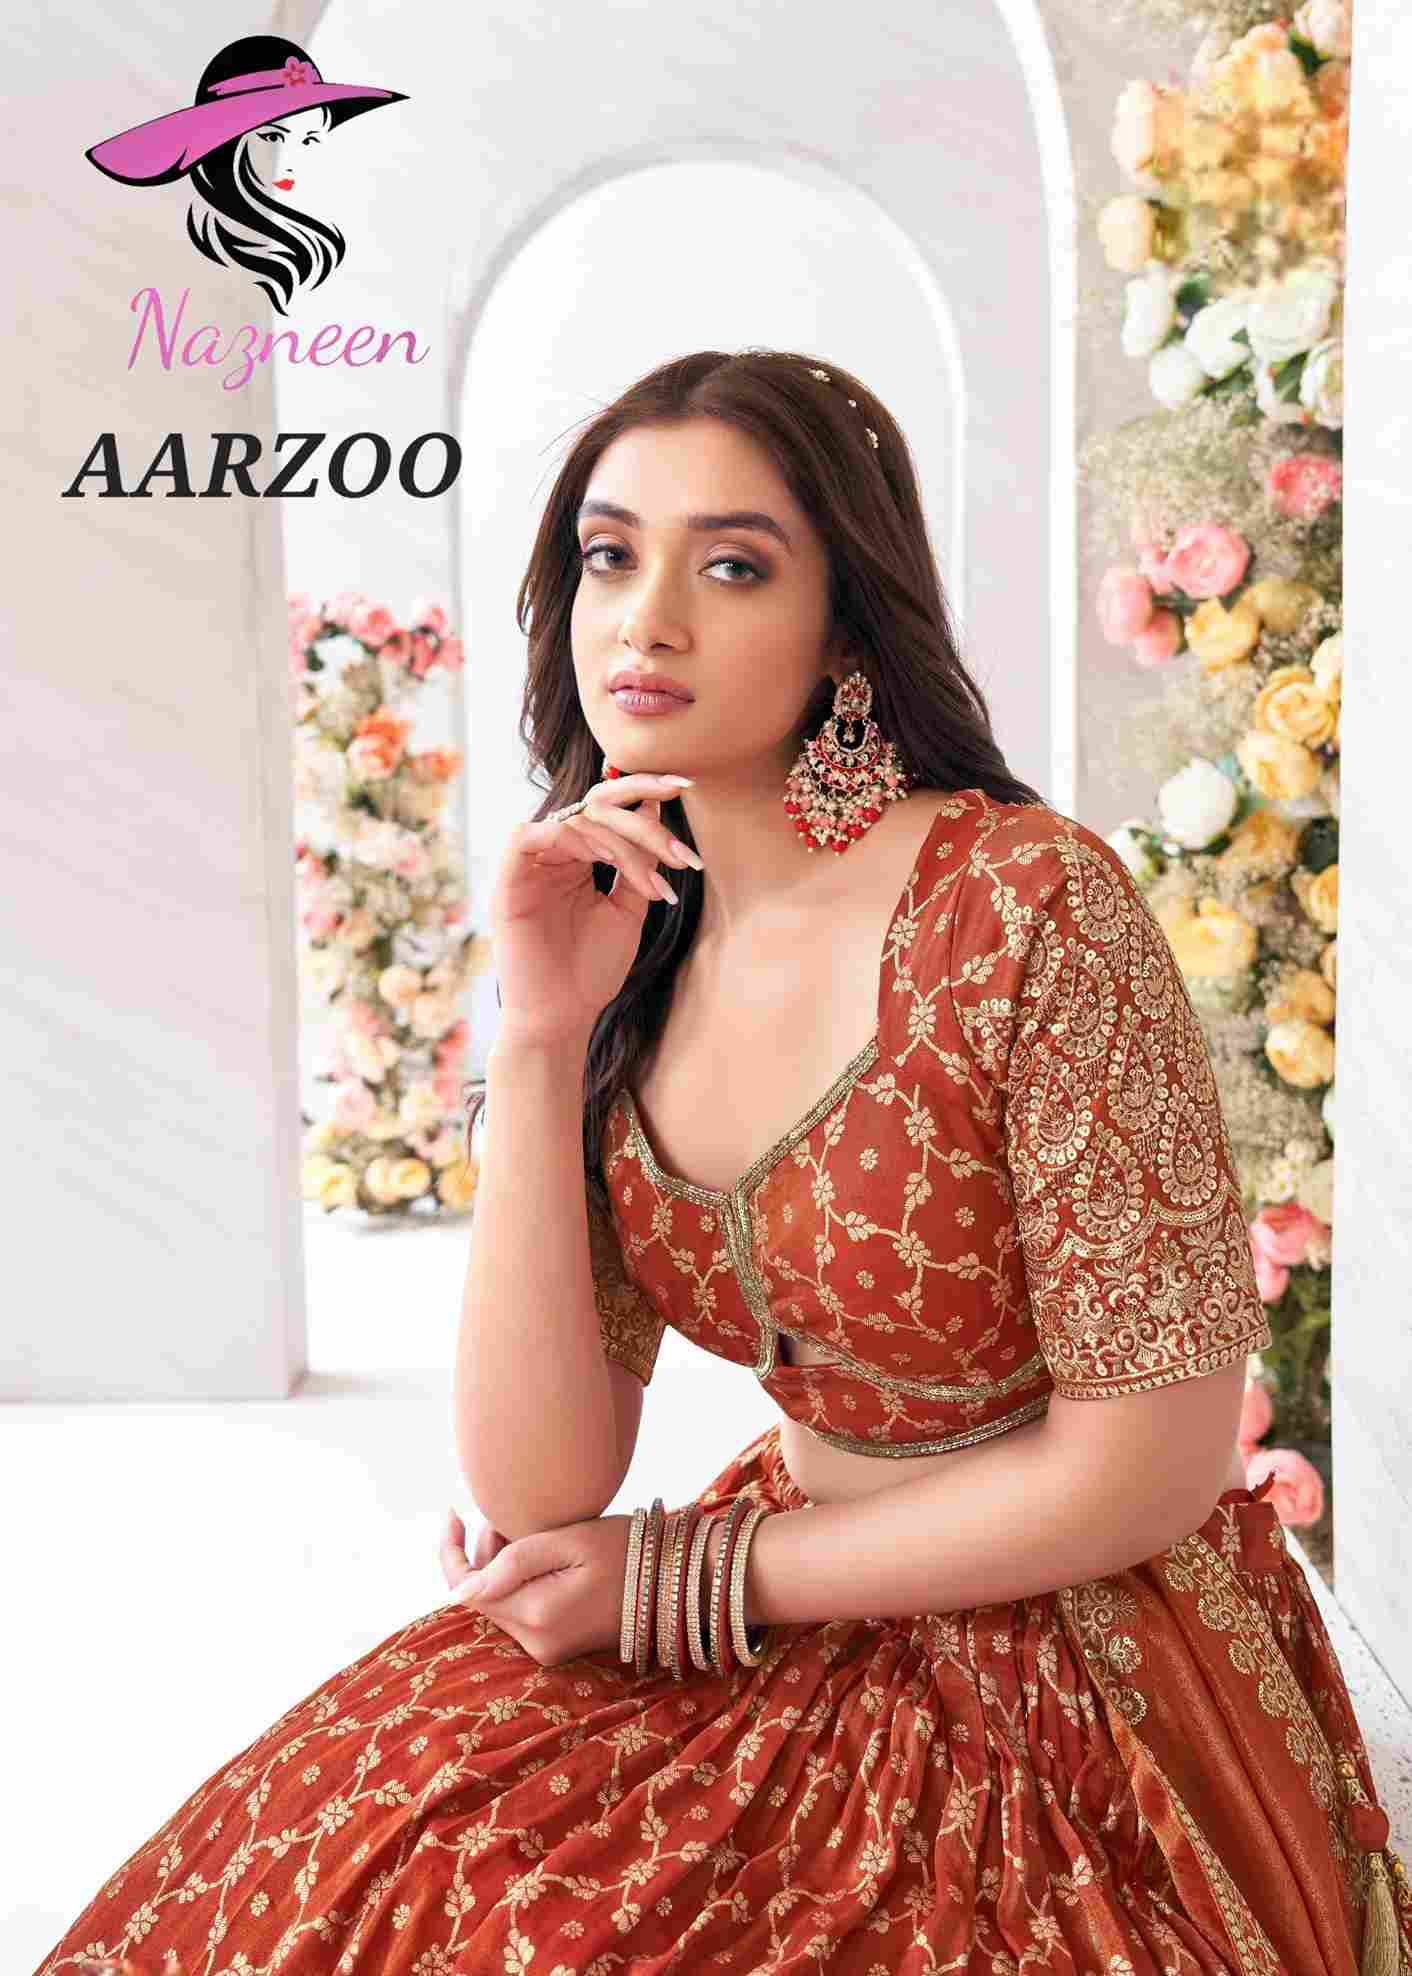 Aarzoo By Nazneen 6163 To 6166 Series Festive Wear Collection Beautiful Stylish Colorful Fancy Party Wear & Occasional Wear Pure Silk/Pure Georgette/Jacquard Lehengas At Wholesale Price